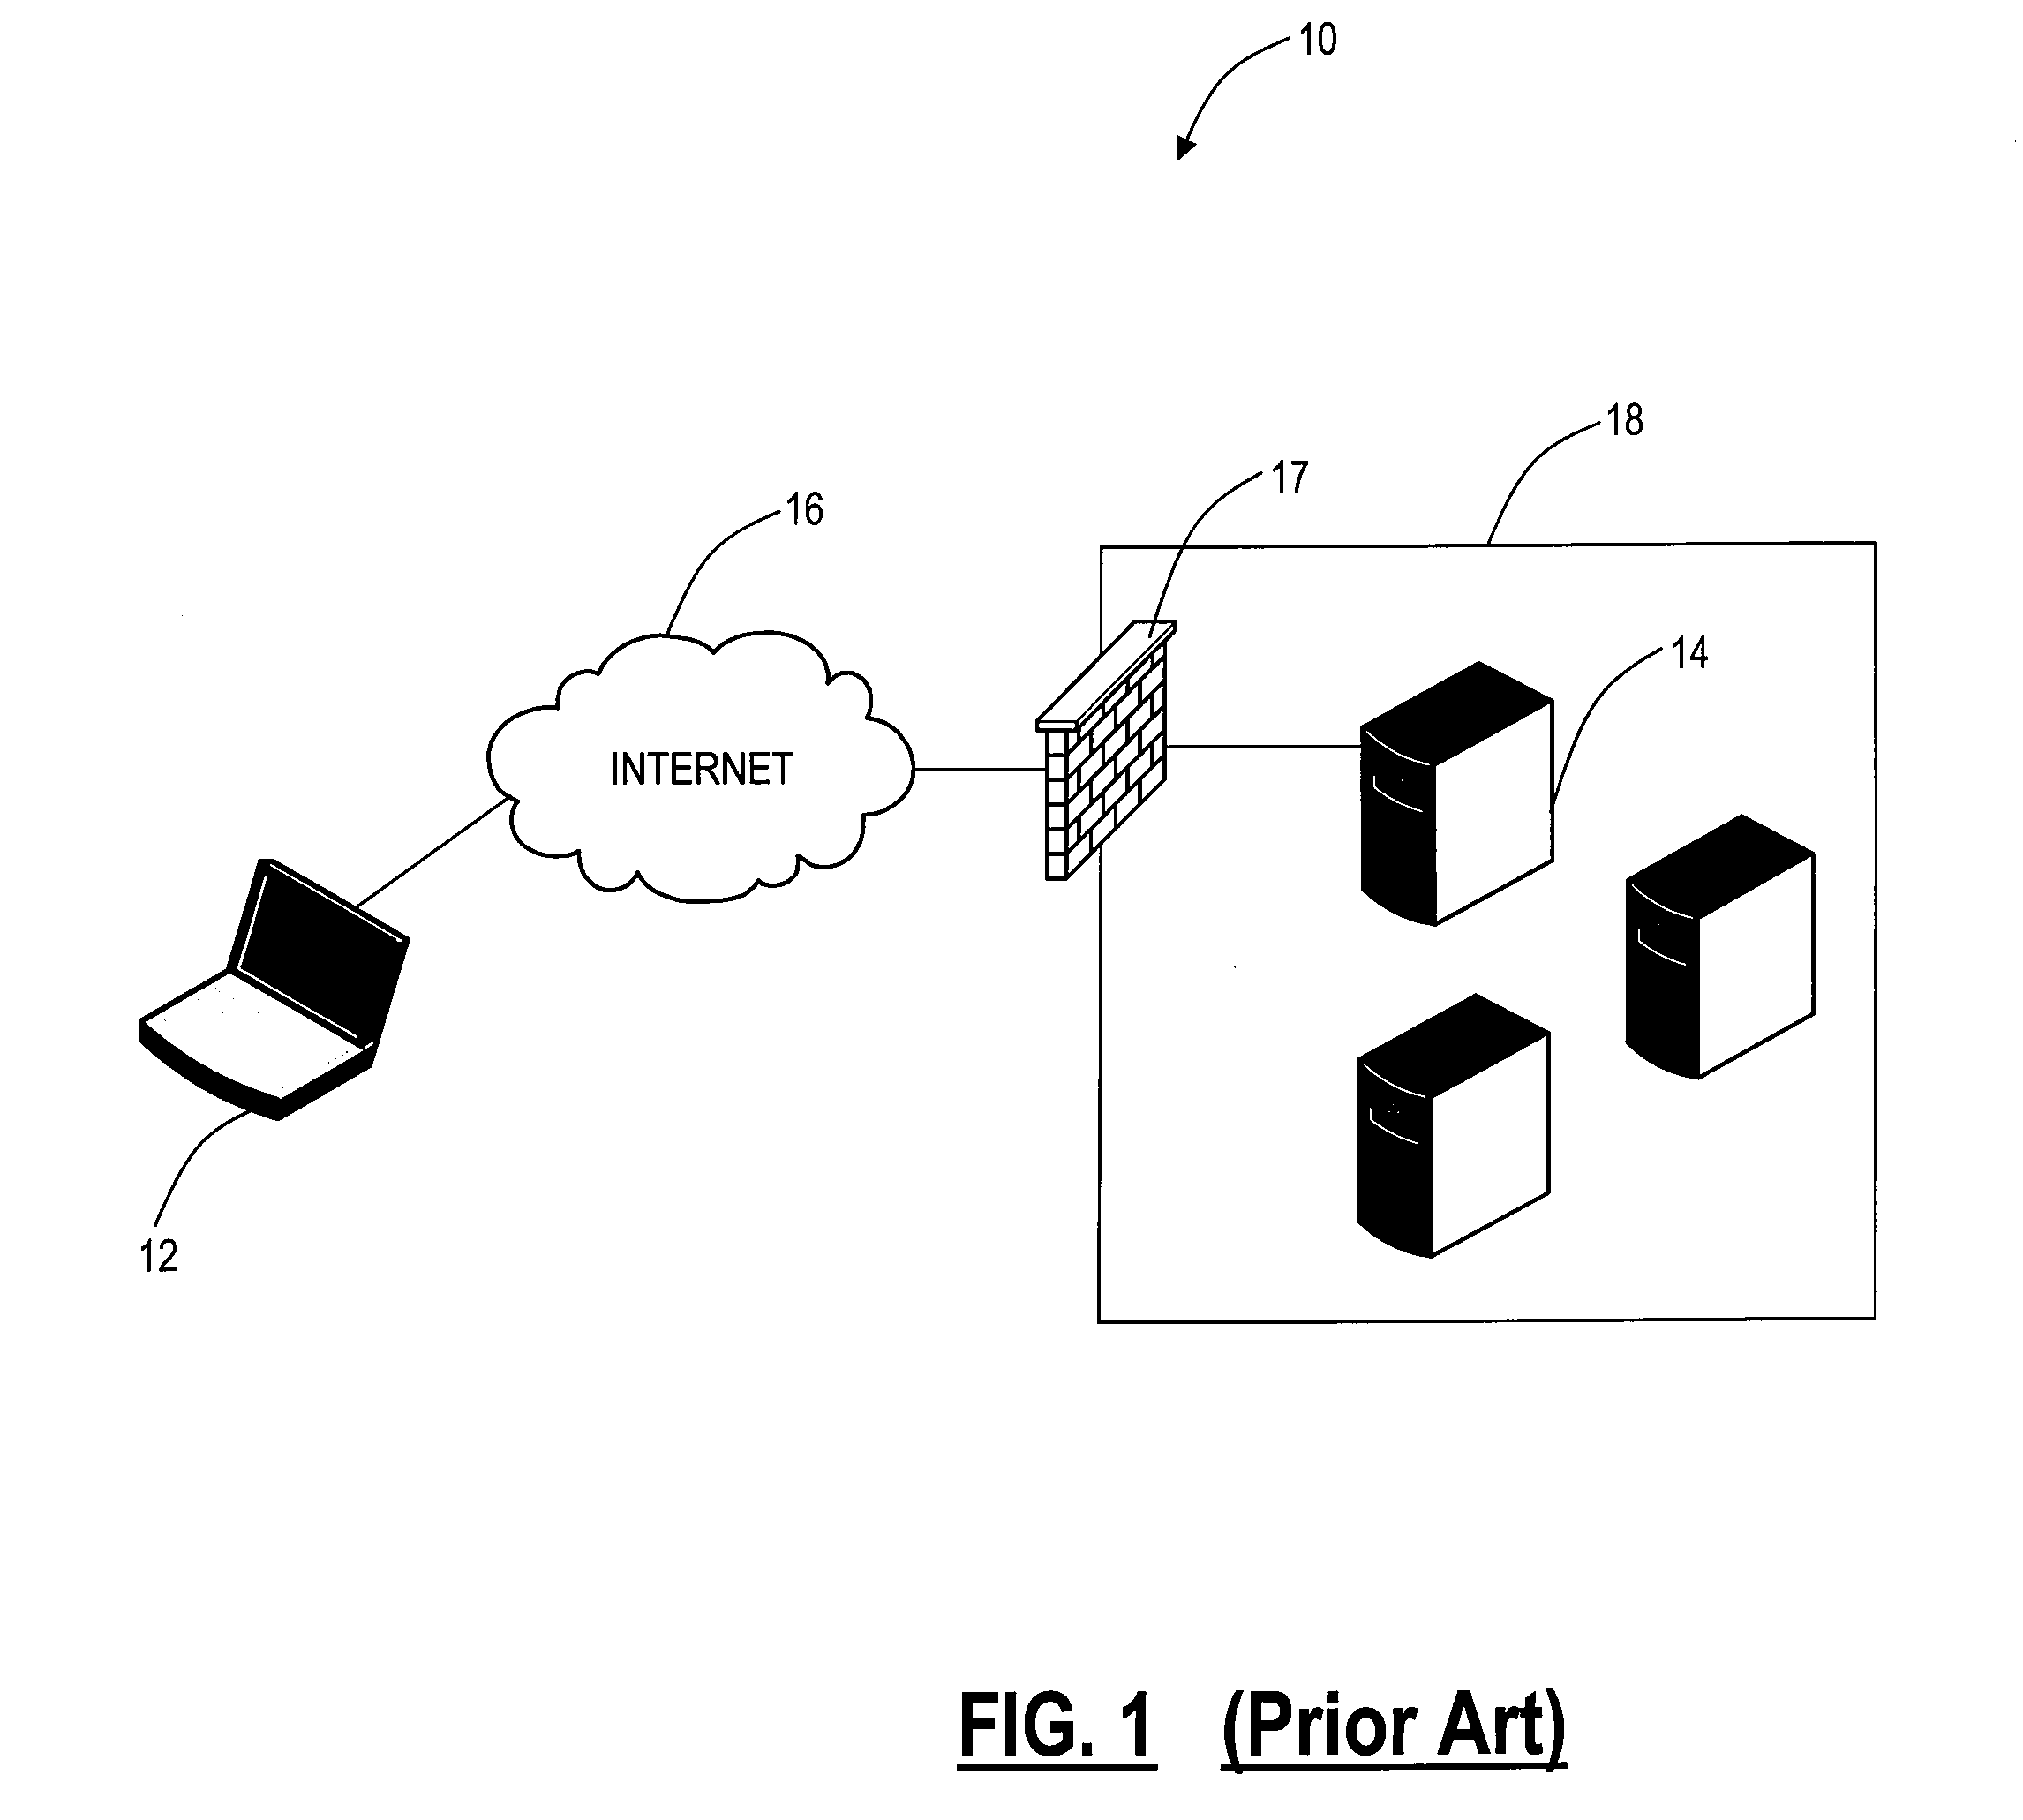 Systems and methods for secure access to remote networks utilizing wireless networks